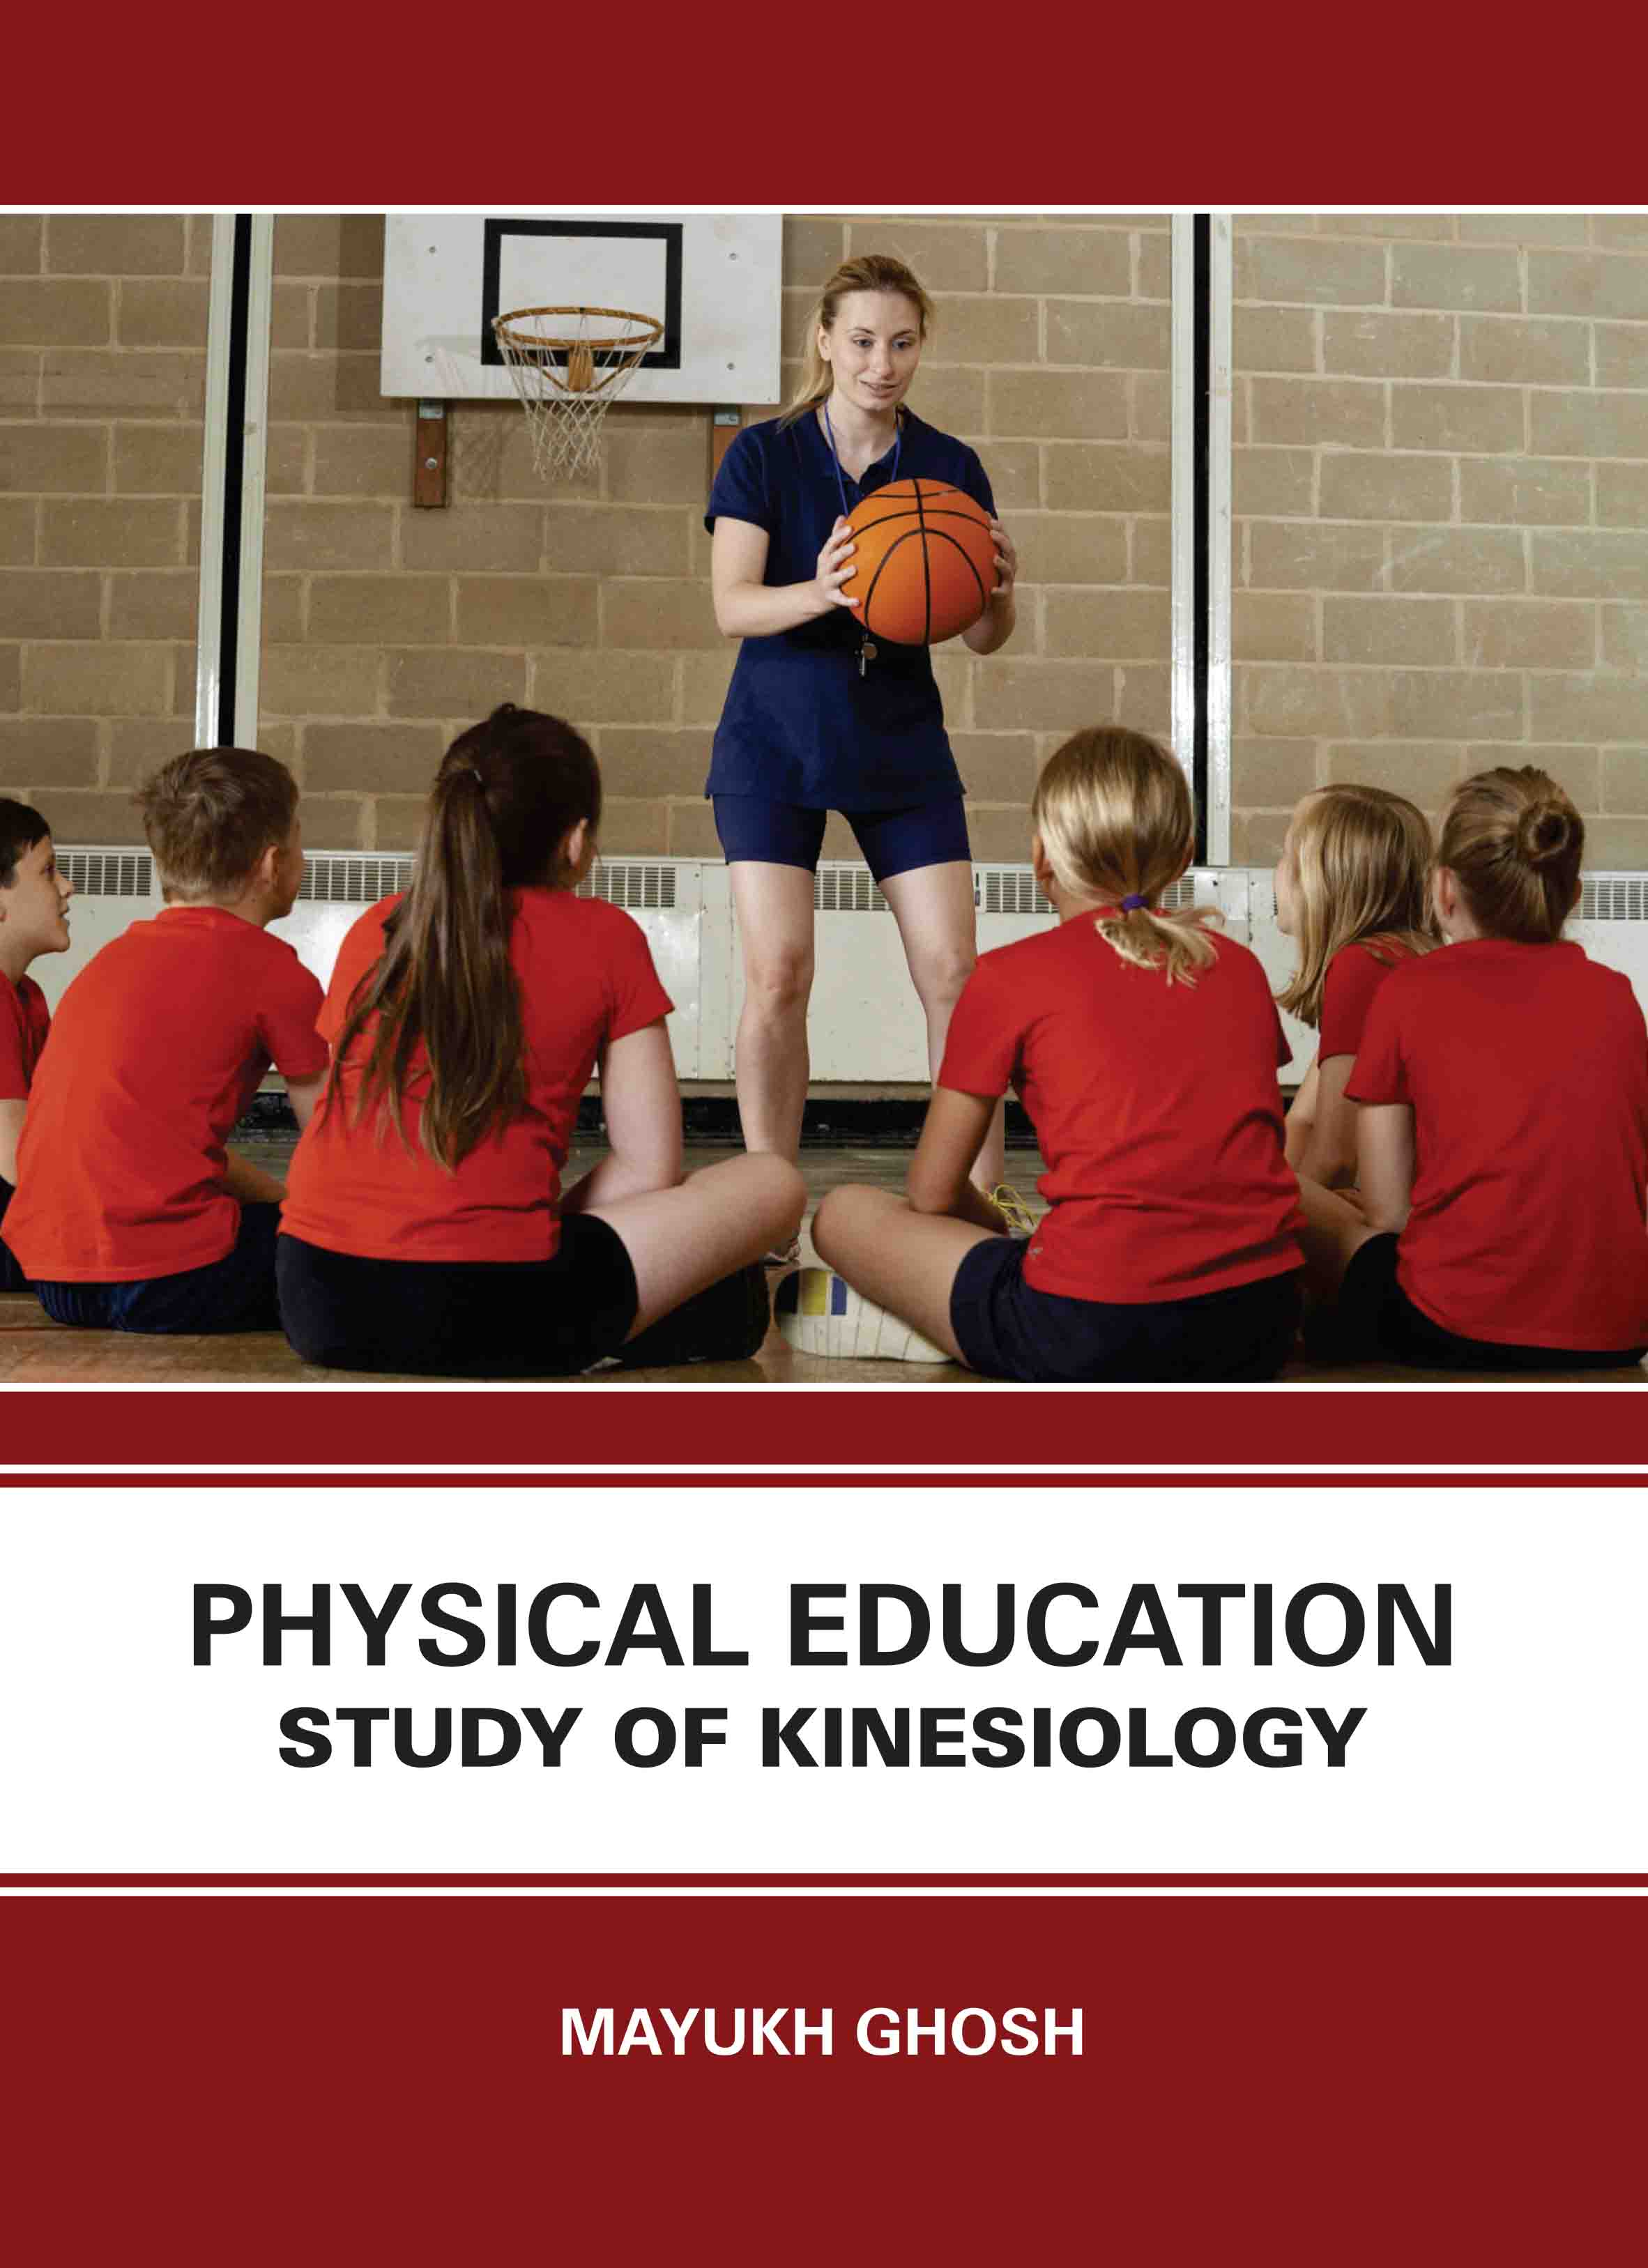 Physical Education: Study of Kinesiology